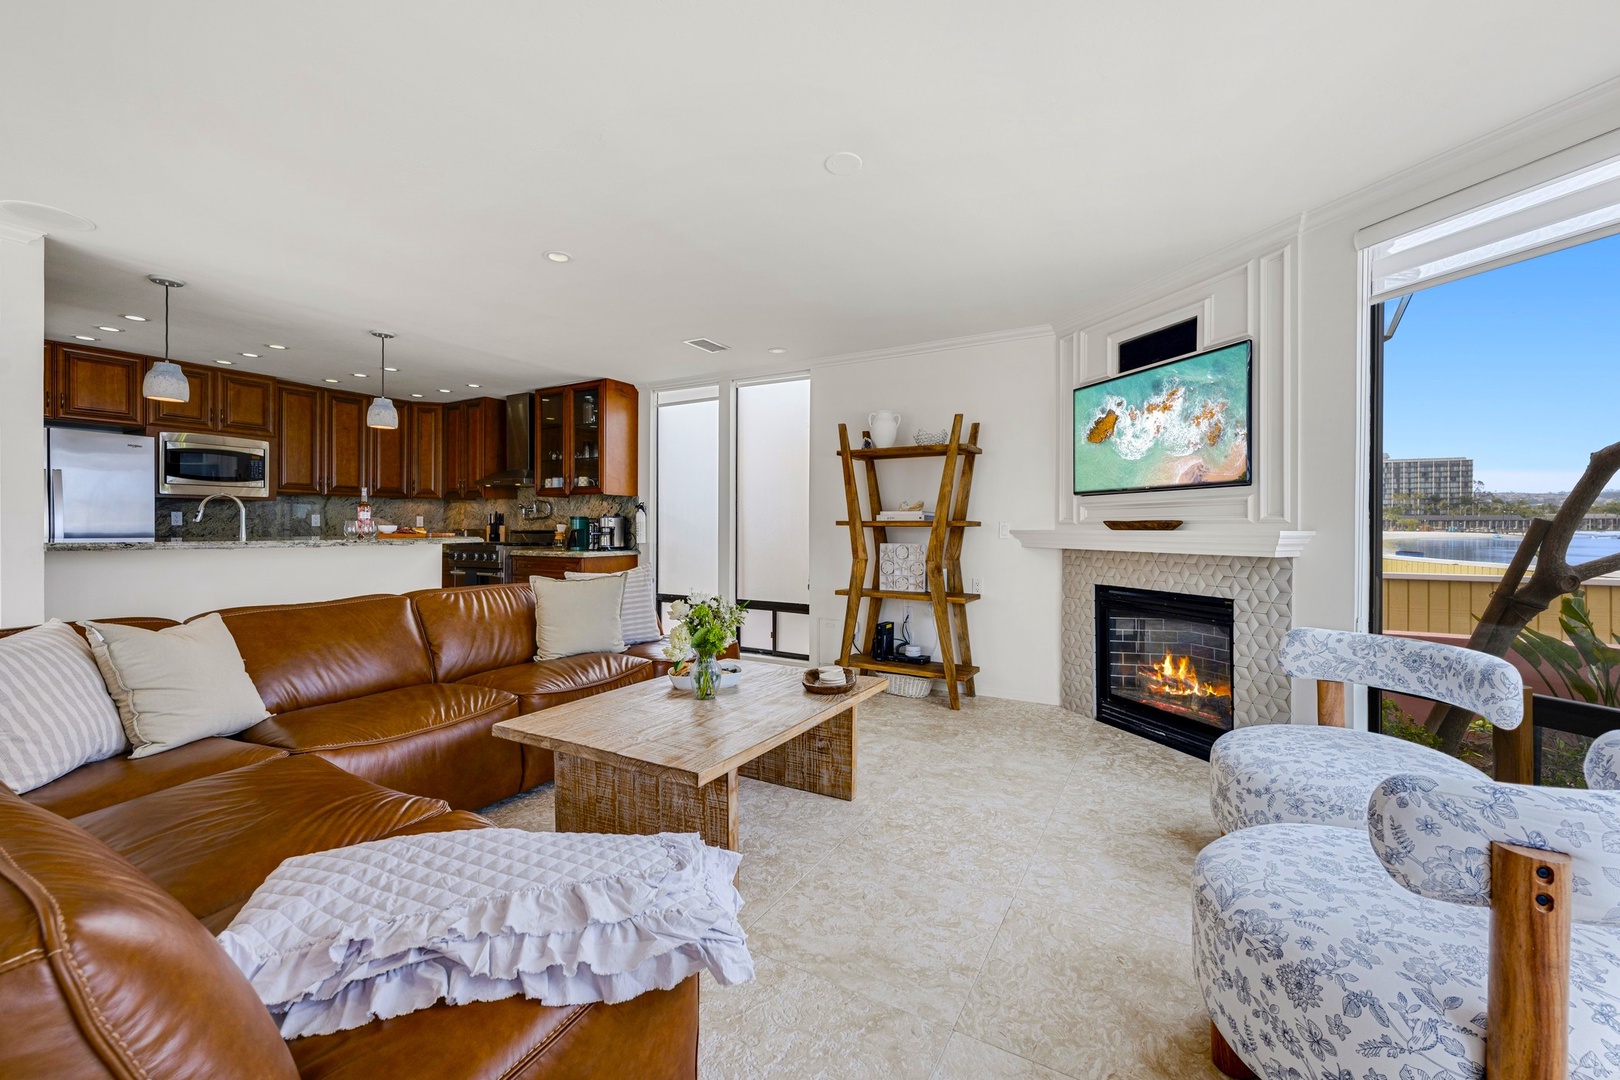 Gas fireplace and TV